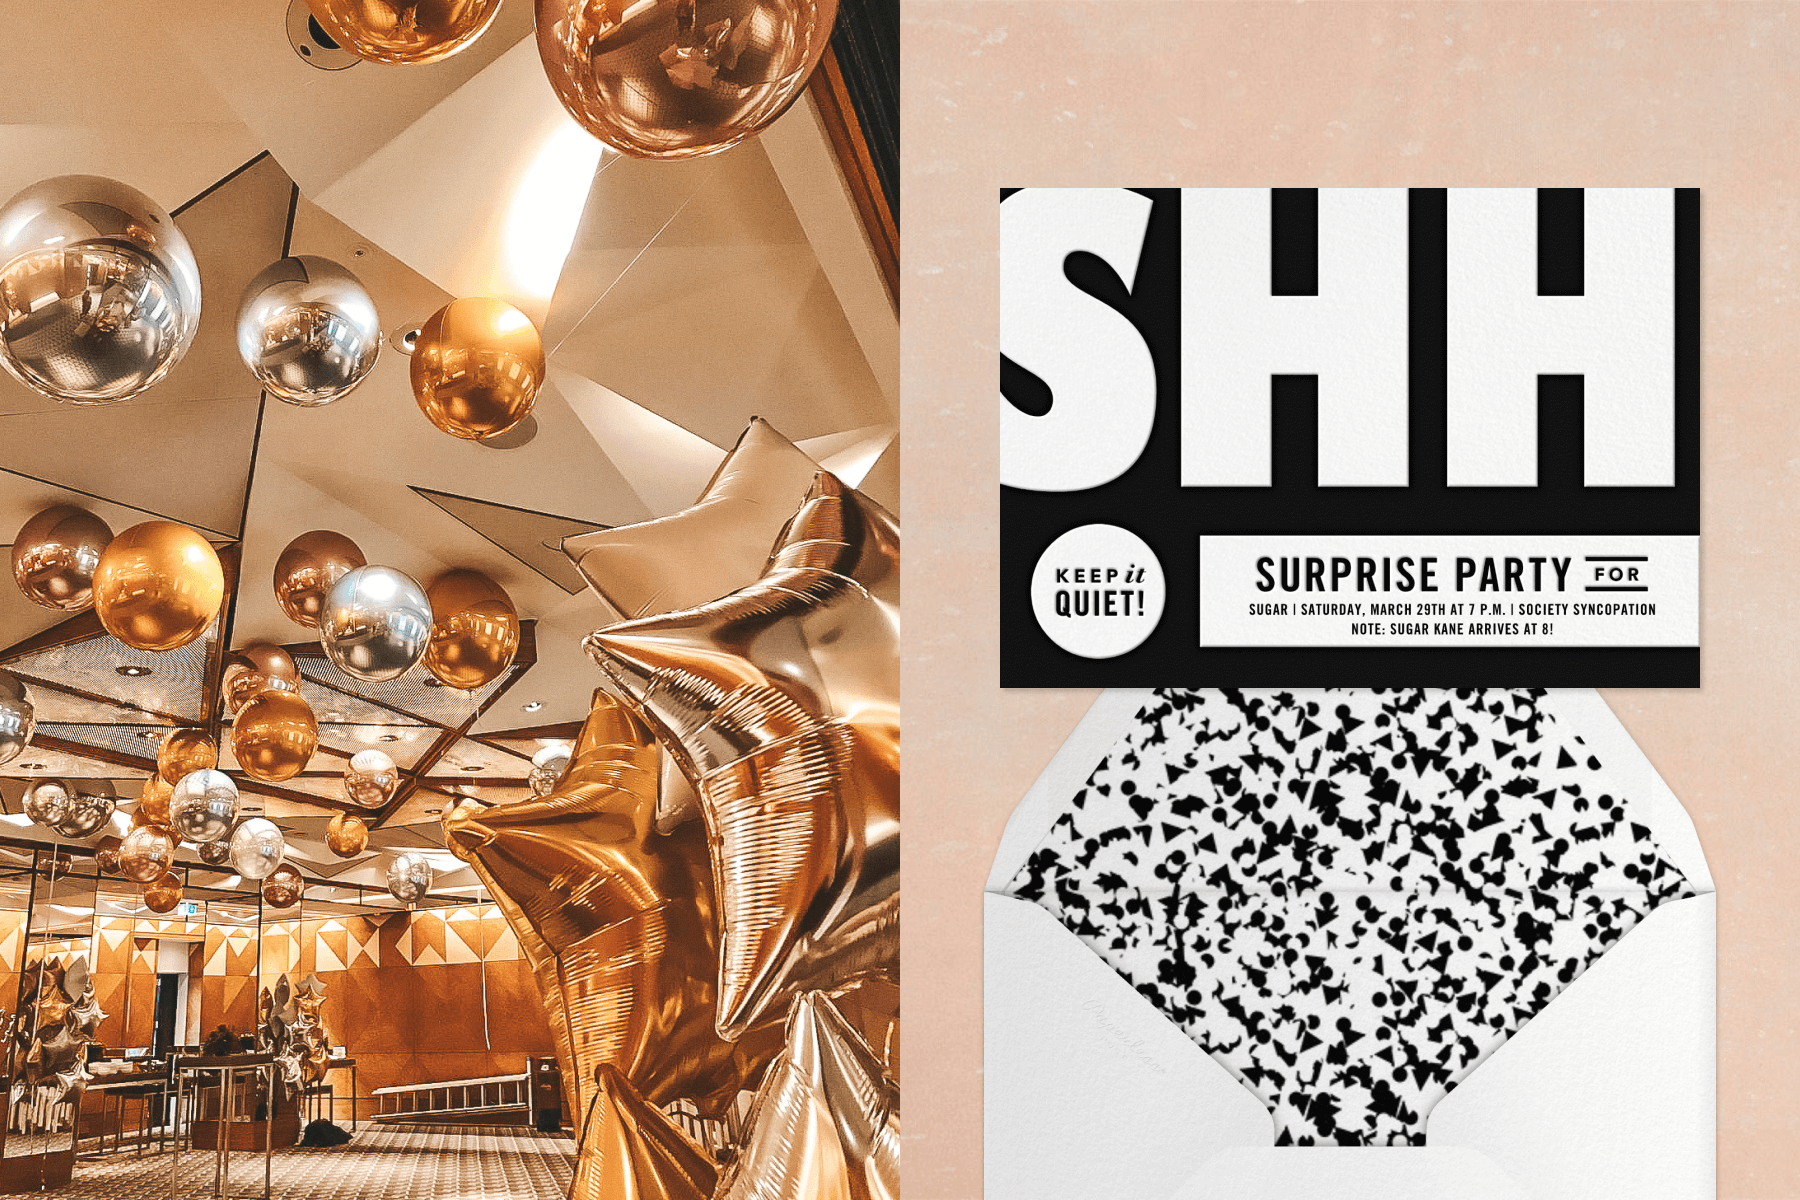 Left: Gold, rose gold, and silver spheres hover on the ceiling of a modern, mirrored room by metallic star-shaped balloons. Right: A black and white surprise party invitation reads “SHH” in large letters and “keep it quiet above a white envelope with abstract liner.